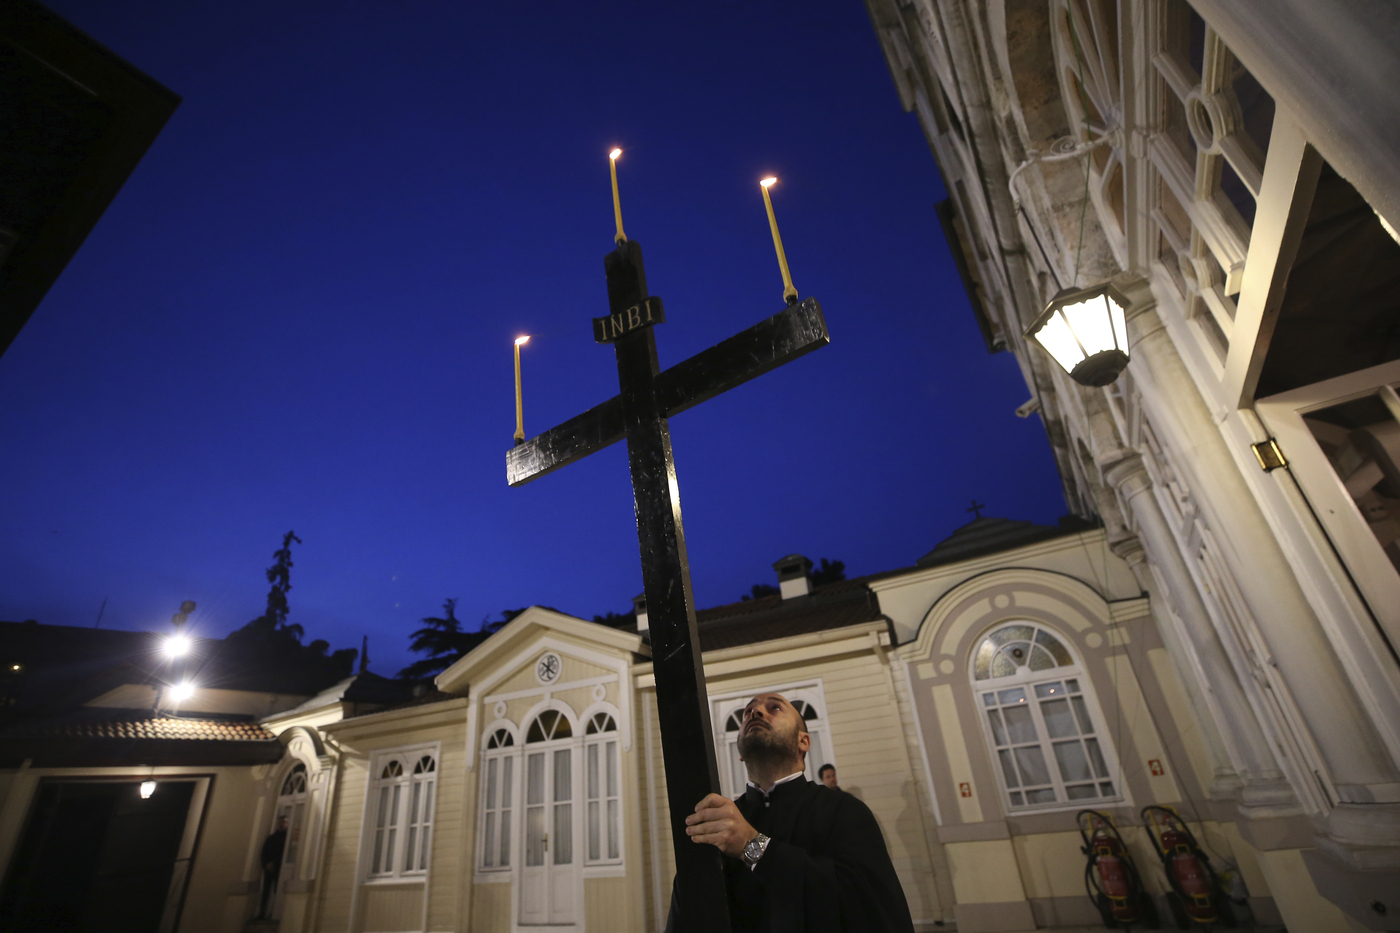 A priest holds a cross, during the Good Friday procession of the Epitaphios led by Ecumenical Patriarch Bartholomew I, the spiritual leader of the world's Orthodox Christians, during Orthodox Easter Week services, held without worshippers to help contain the spread of coronavirus at the Patriarchal Church of St. George in Istanbul, Friday, April 17, 2020. For Orthodox Christians, this is normally a time of reflection and joy, of centuries-old ceremonies steeped in symbolism and tradition. But this year, Easter, by far the most significant religious holiday for the world's roughly 300 million Orthodox, has essentially been cancelled in a world locked down by the COVID-19 pandemic. (AP Photo/Emrah Gurel, Pool)